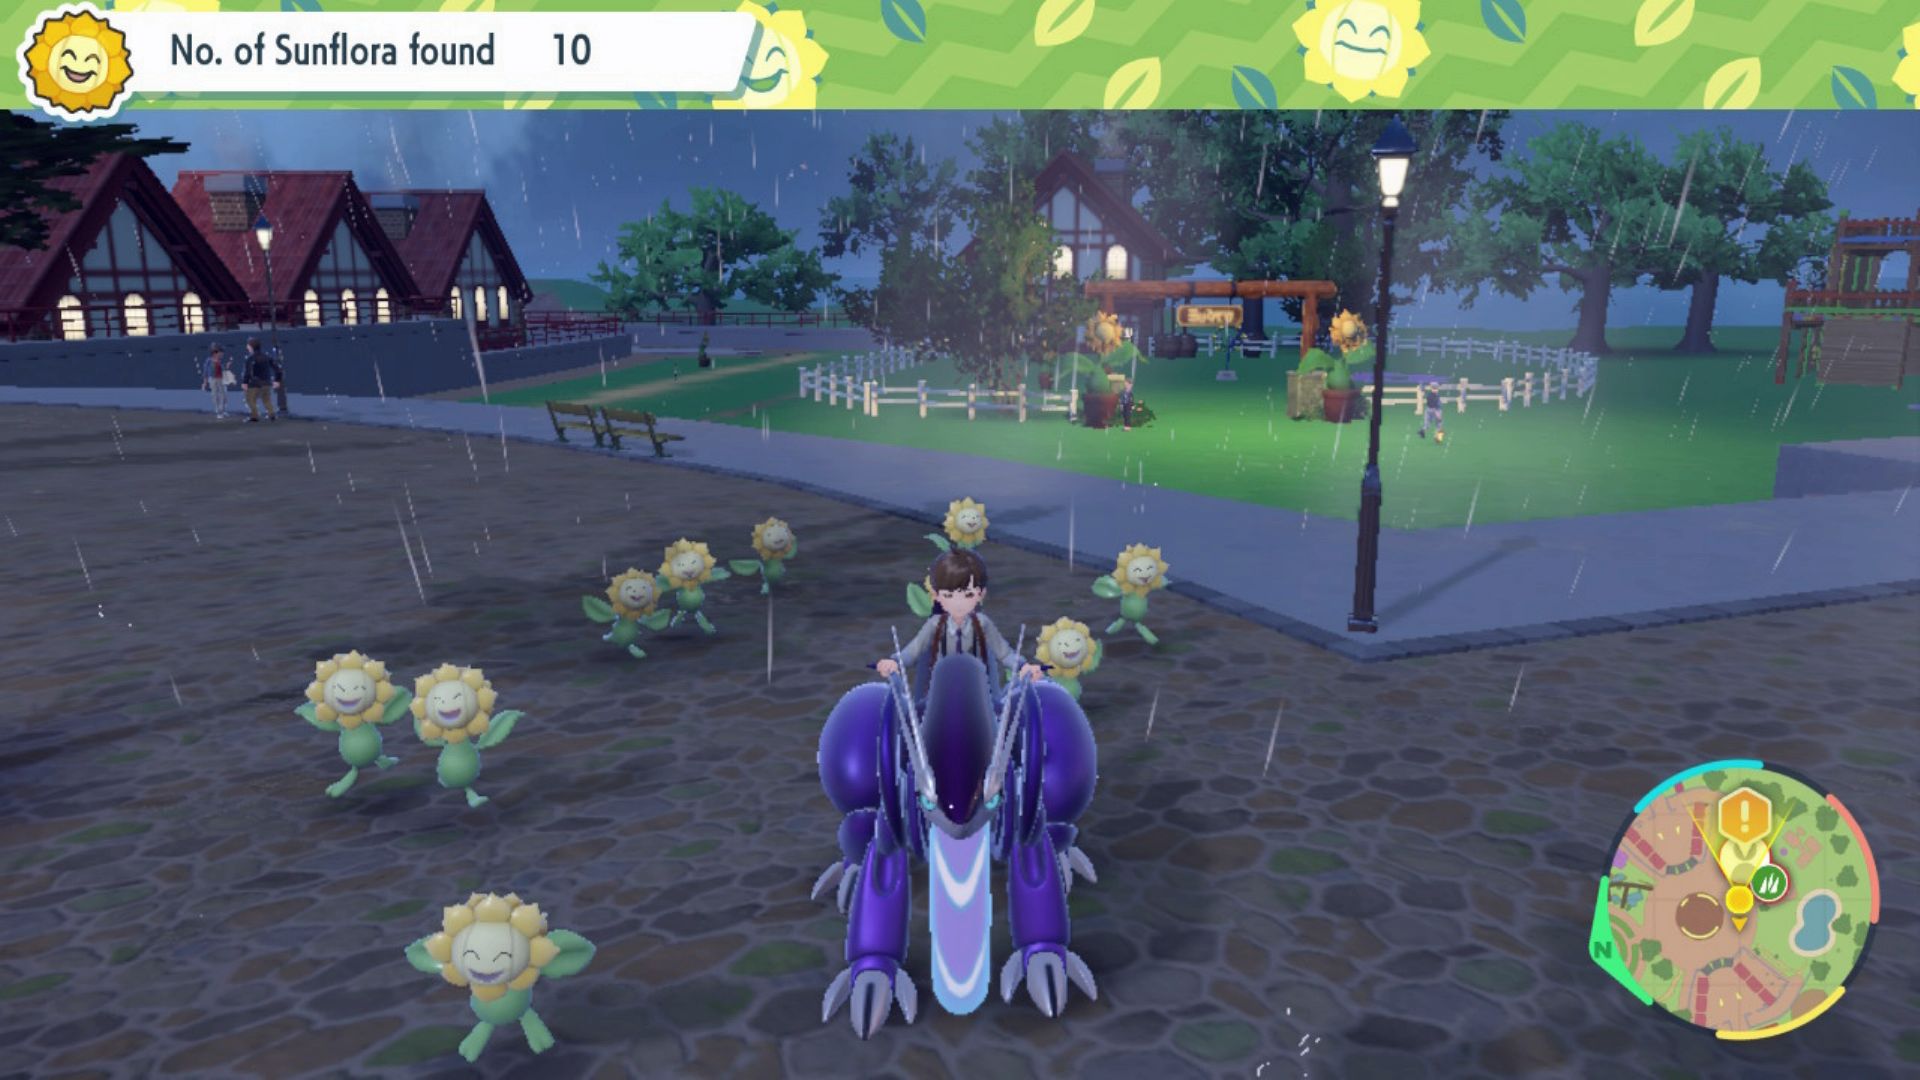 The Pokemon Violet Protagonist being followed by a group of Sunflora